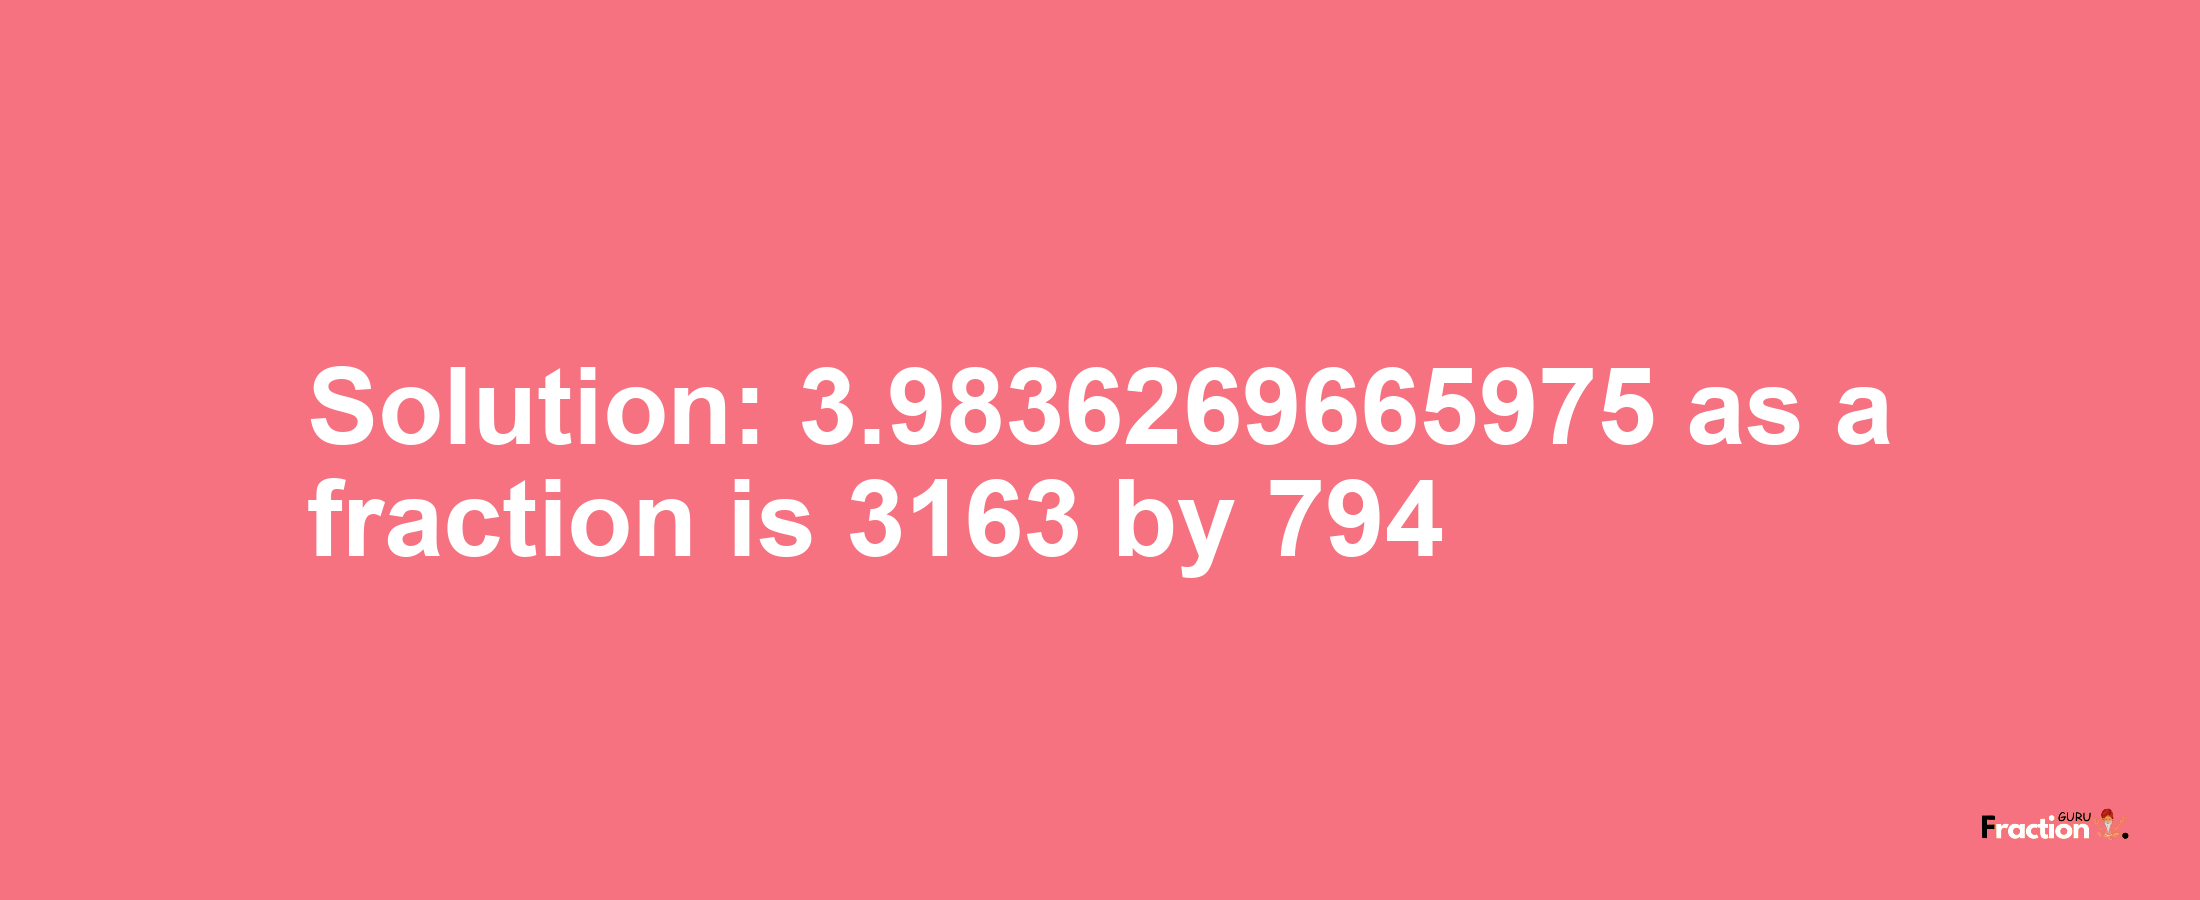 Solution:3.9836269665975 as a fraction is 3163/794